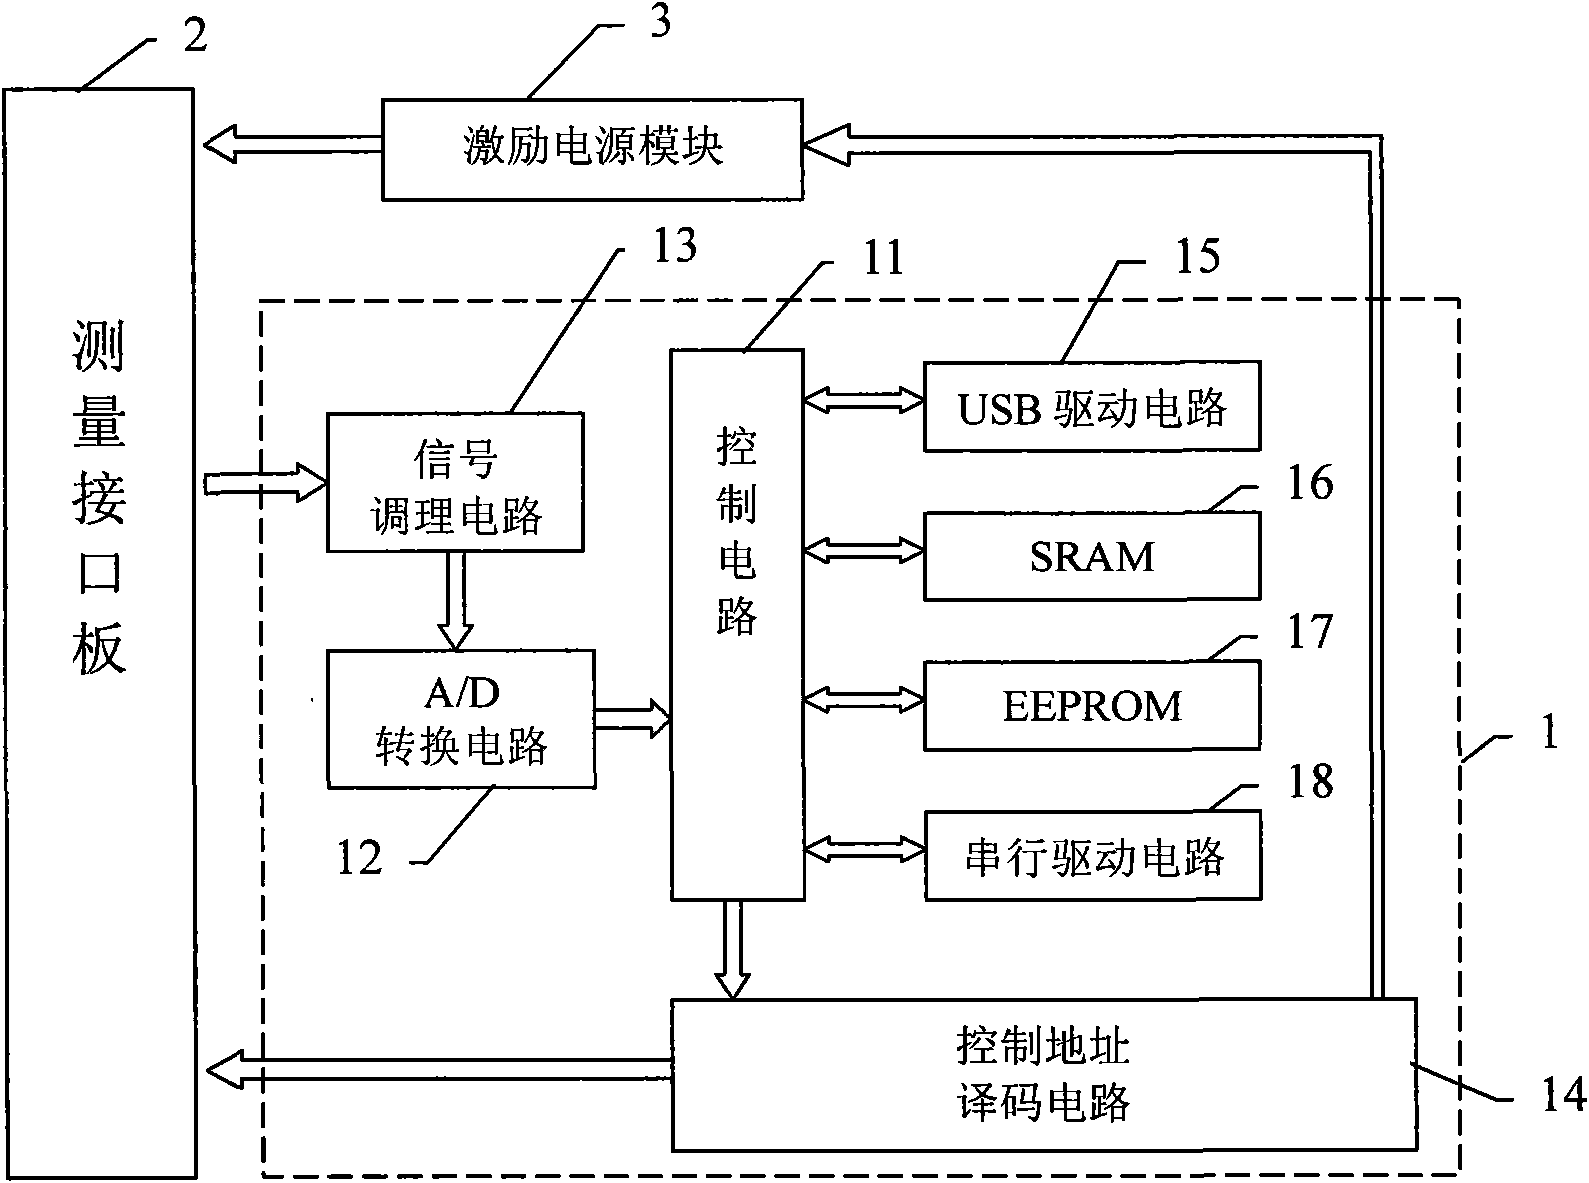 Device for automatically testing performance of cable bunch